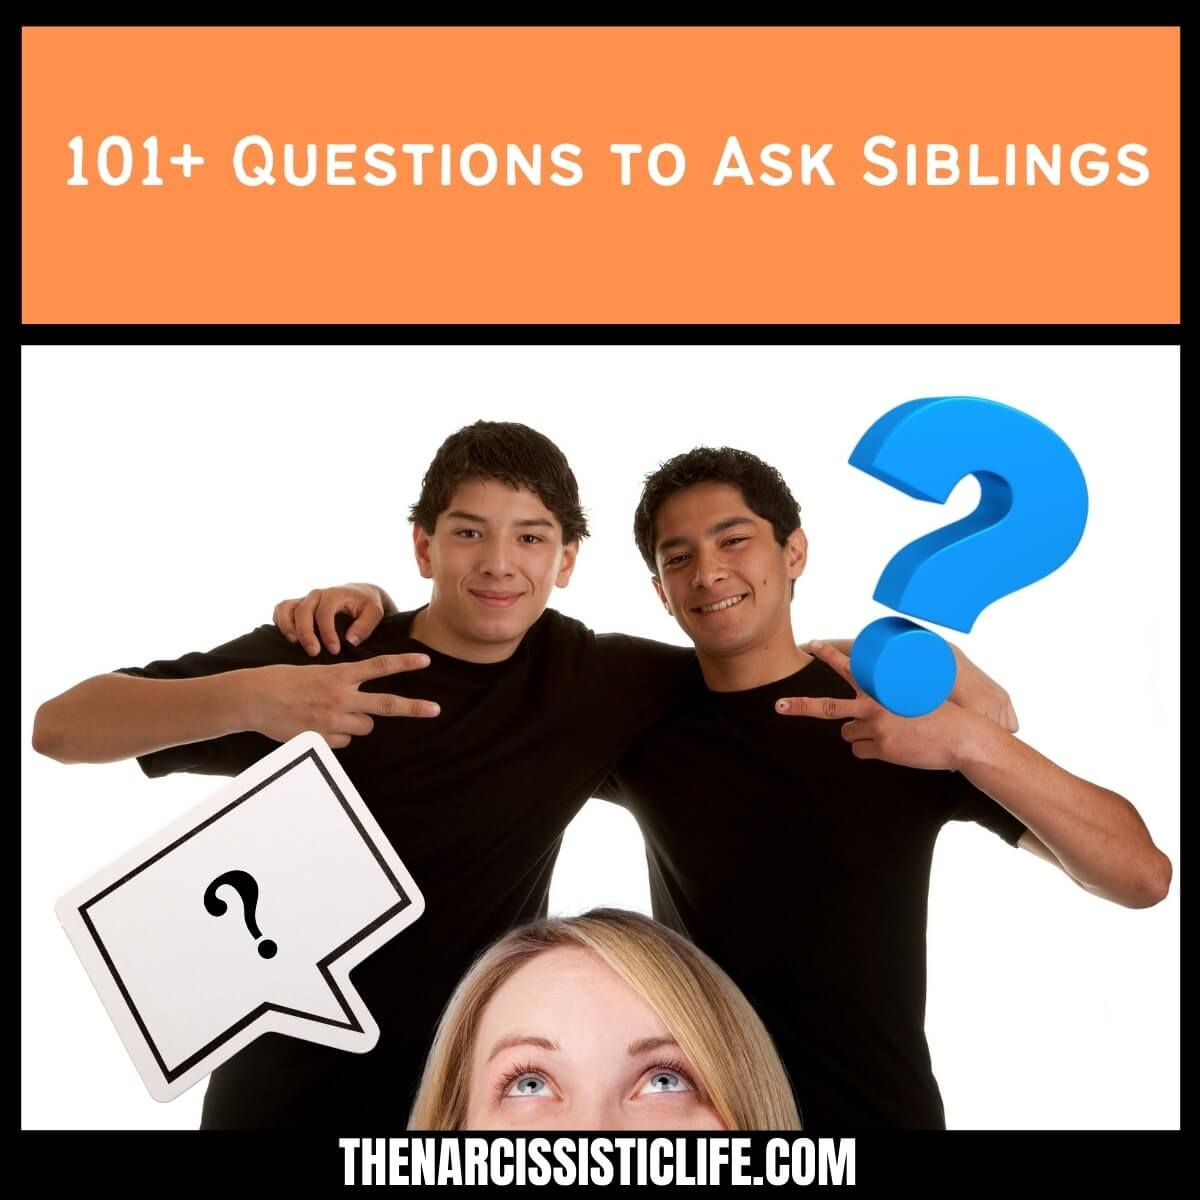 101+ Questions to Ask Siblings